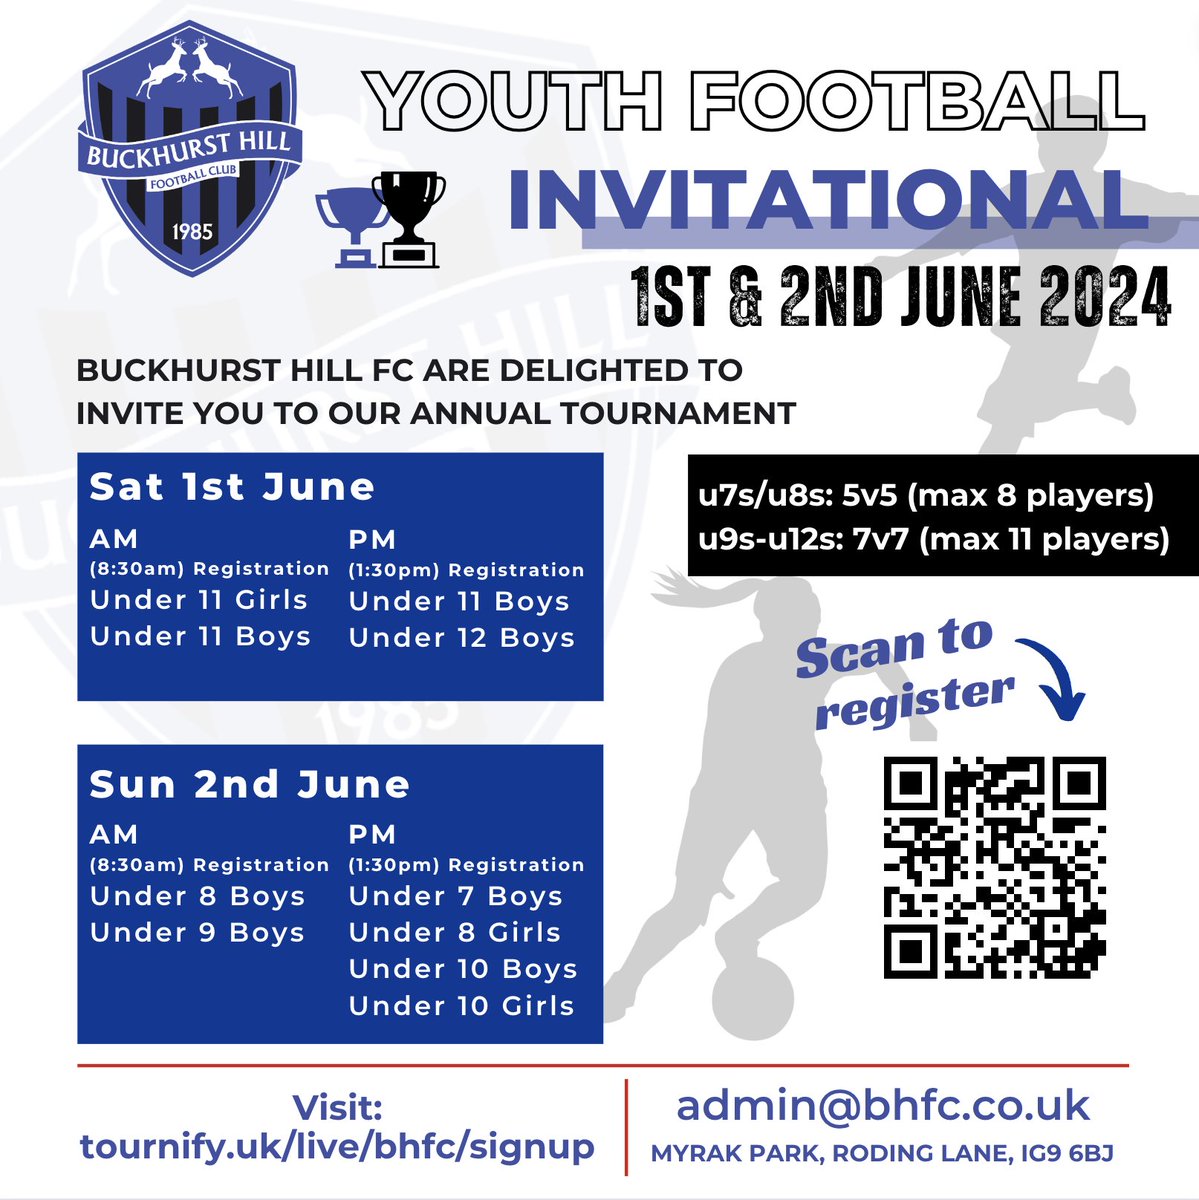 🚨ONLY FEW SPACES LEFT IN OUR TOURNAMENT!! SIGN UP NOW > tournify.uk/live/bhfc u7 boys - 3 spaces u8 boys - 10 spaces u8 girls - 2 spaces u9 boys - FULL ❌ u10s boys - FULL ❌ u10 girls - 5 spaces u11 boys - FULL ❌ u11 girls - FULL ❌ u12 boys - 4 spaces